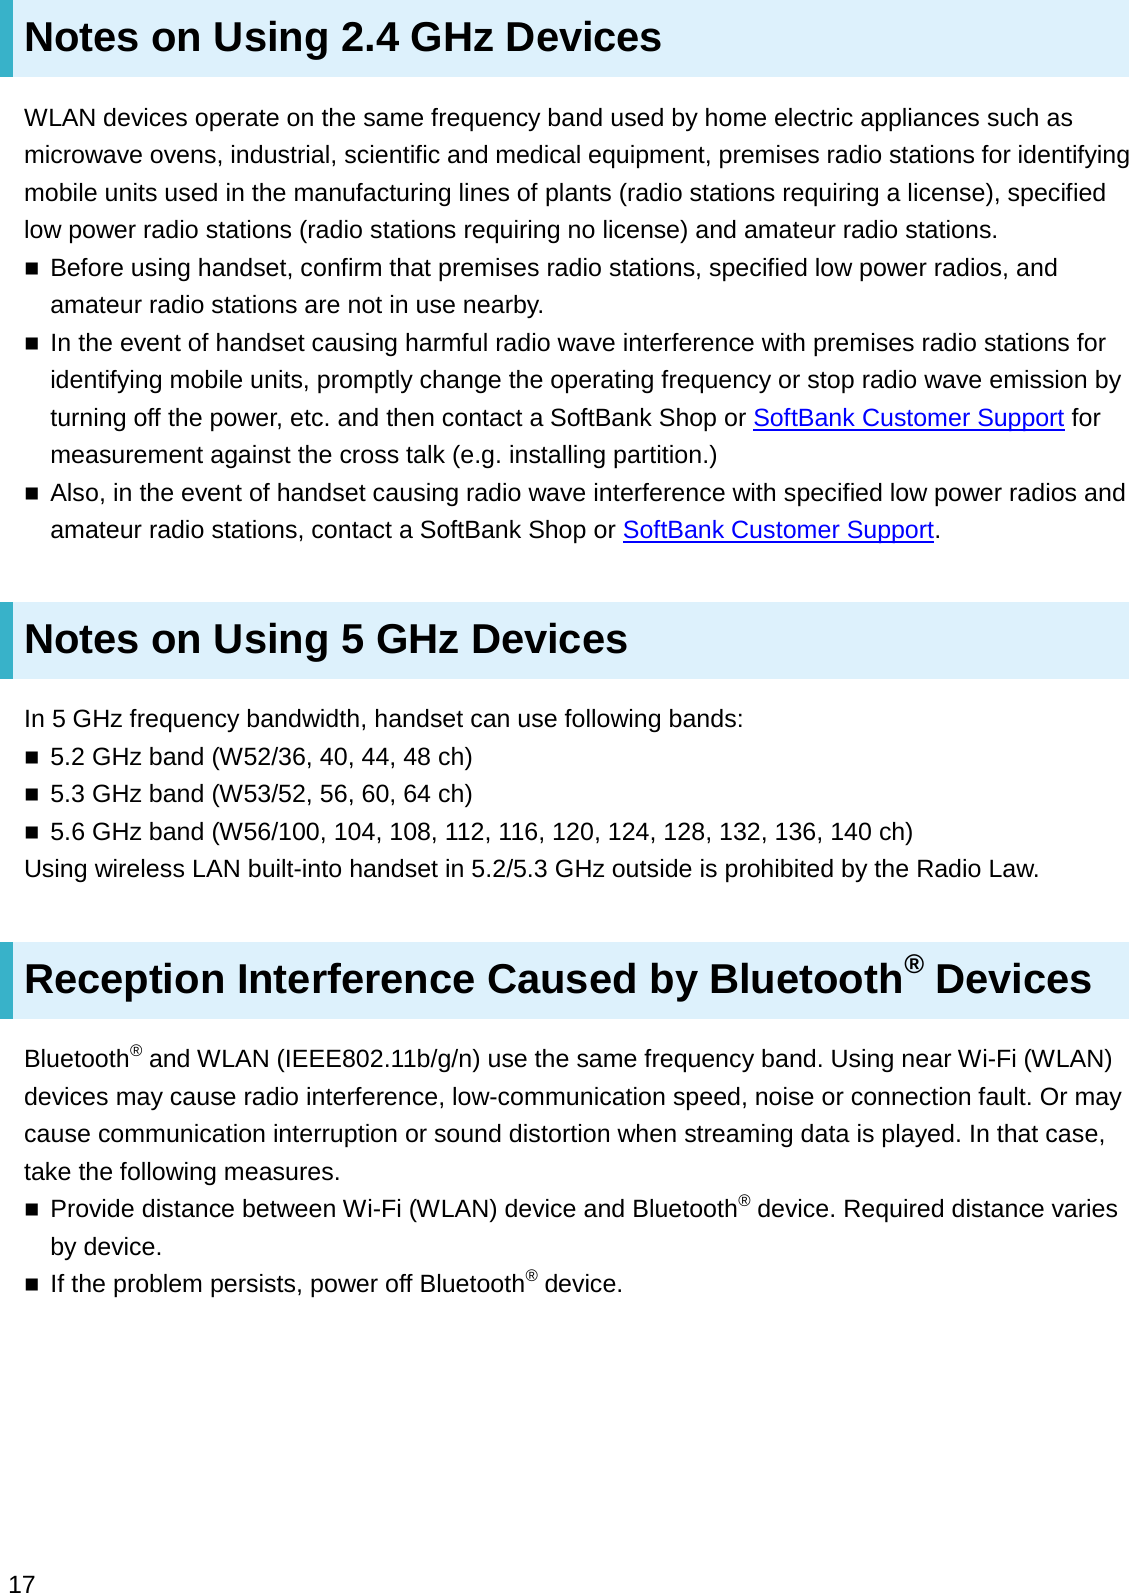 Notes on Using 2.4 GHz DevicesWLAN devices operate on the same frequency band used by home electric appliances such as microwave ovens, industrial, scientific and medical equipment, premises radio stations for identifying mobile units used in the manufacturing lines of plants (radio stations requiring a license), specified low power radio stations (radio stations requiring no license) and amateur radio stations.Before using handset, confirm that premises radio stations, specified low power radios, and amateur radio stations are not in use nearby.In the event of handset causing harmful radio wave interference with premises radio stations for identifying mobile units, promptly change the operating frequency or stop radio wave emission by turning off the power, etc. and then contact a SoftBank Shop or SoftBank Customer Support for measurement against the cross talk (e.g. installing partition.)Also, in the event of handset causing radio wave interference with specified low power radios and amateur radio stations, contact a SoftBank Shop or SoftBank Customer Support.Notes on Using 5 GHz DevicesIn 5 GHz frequency bandwidth, handset can use following bands:5.2 GHz band (W52/36, 40, 44, 48 ch)5.3 GHz band (W53/52, 56, 60, 64 ch)5.6 GHz band (W56/100, 104, 108, 112, 116, 120, 124, 128, 132, 136, 140 ch)Using wireless LAN built-into handset in 5.2/5.3 GHz outside is prohibited by the Radio Law.Reception Interference Caused by Bluetooth®DevicesBluetooth®and WLAN (IEEE802.11b/g/n) use the same frequency band. Using near Wi-Fi (WLAN) devices may cause radio interference, low-communication speed, noise or connection fault. Or may cause communication interruption or sound distortion when streaming data is played. In that case, take the following measures.Provide distance between Wi-Fi (WLAN) device and Bluetooth®device. Required distance varies by device.If the problem persists, power off Bluetooth®device.17